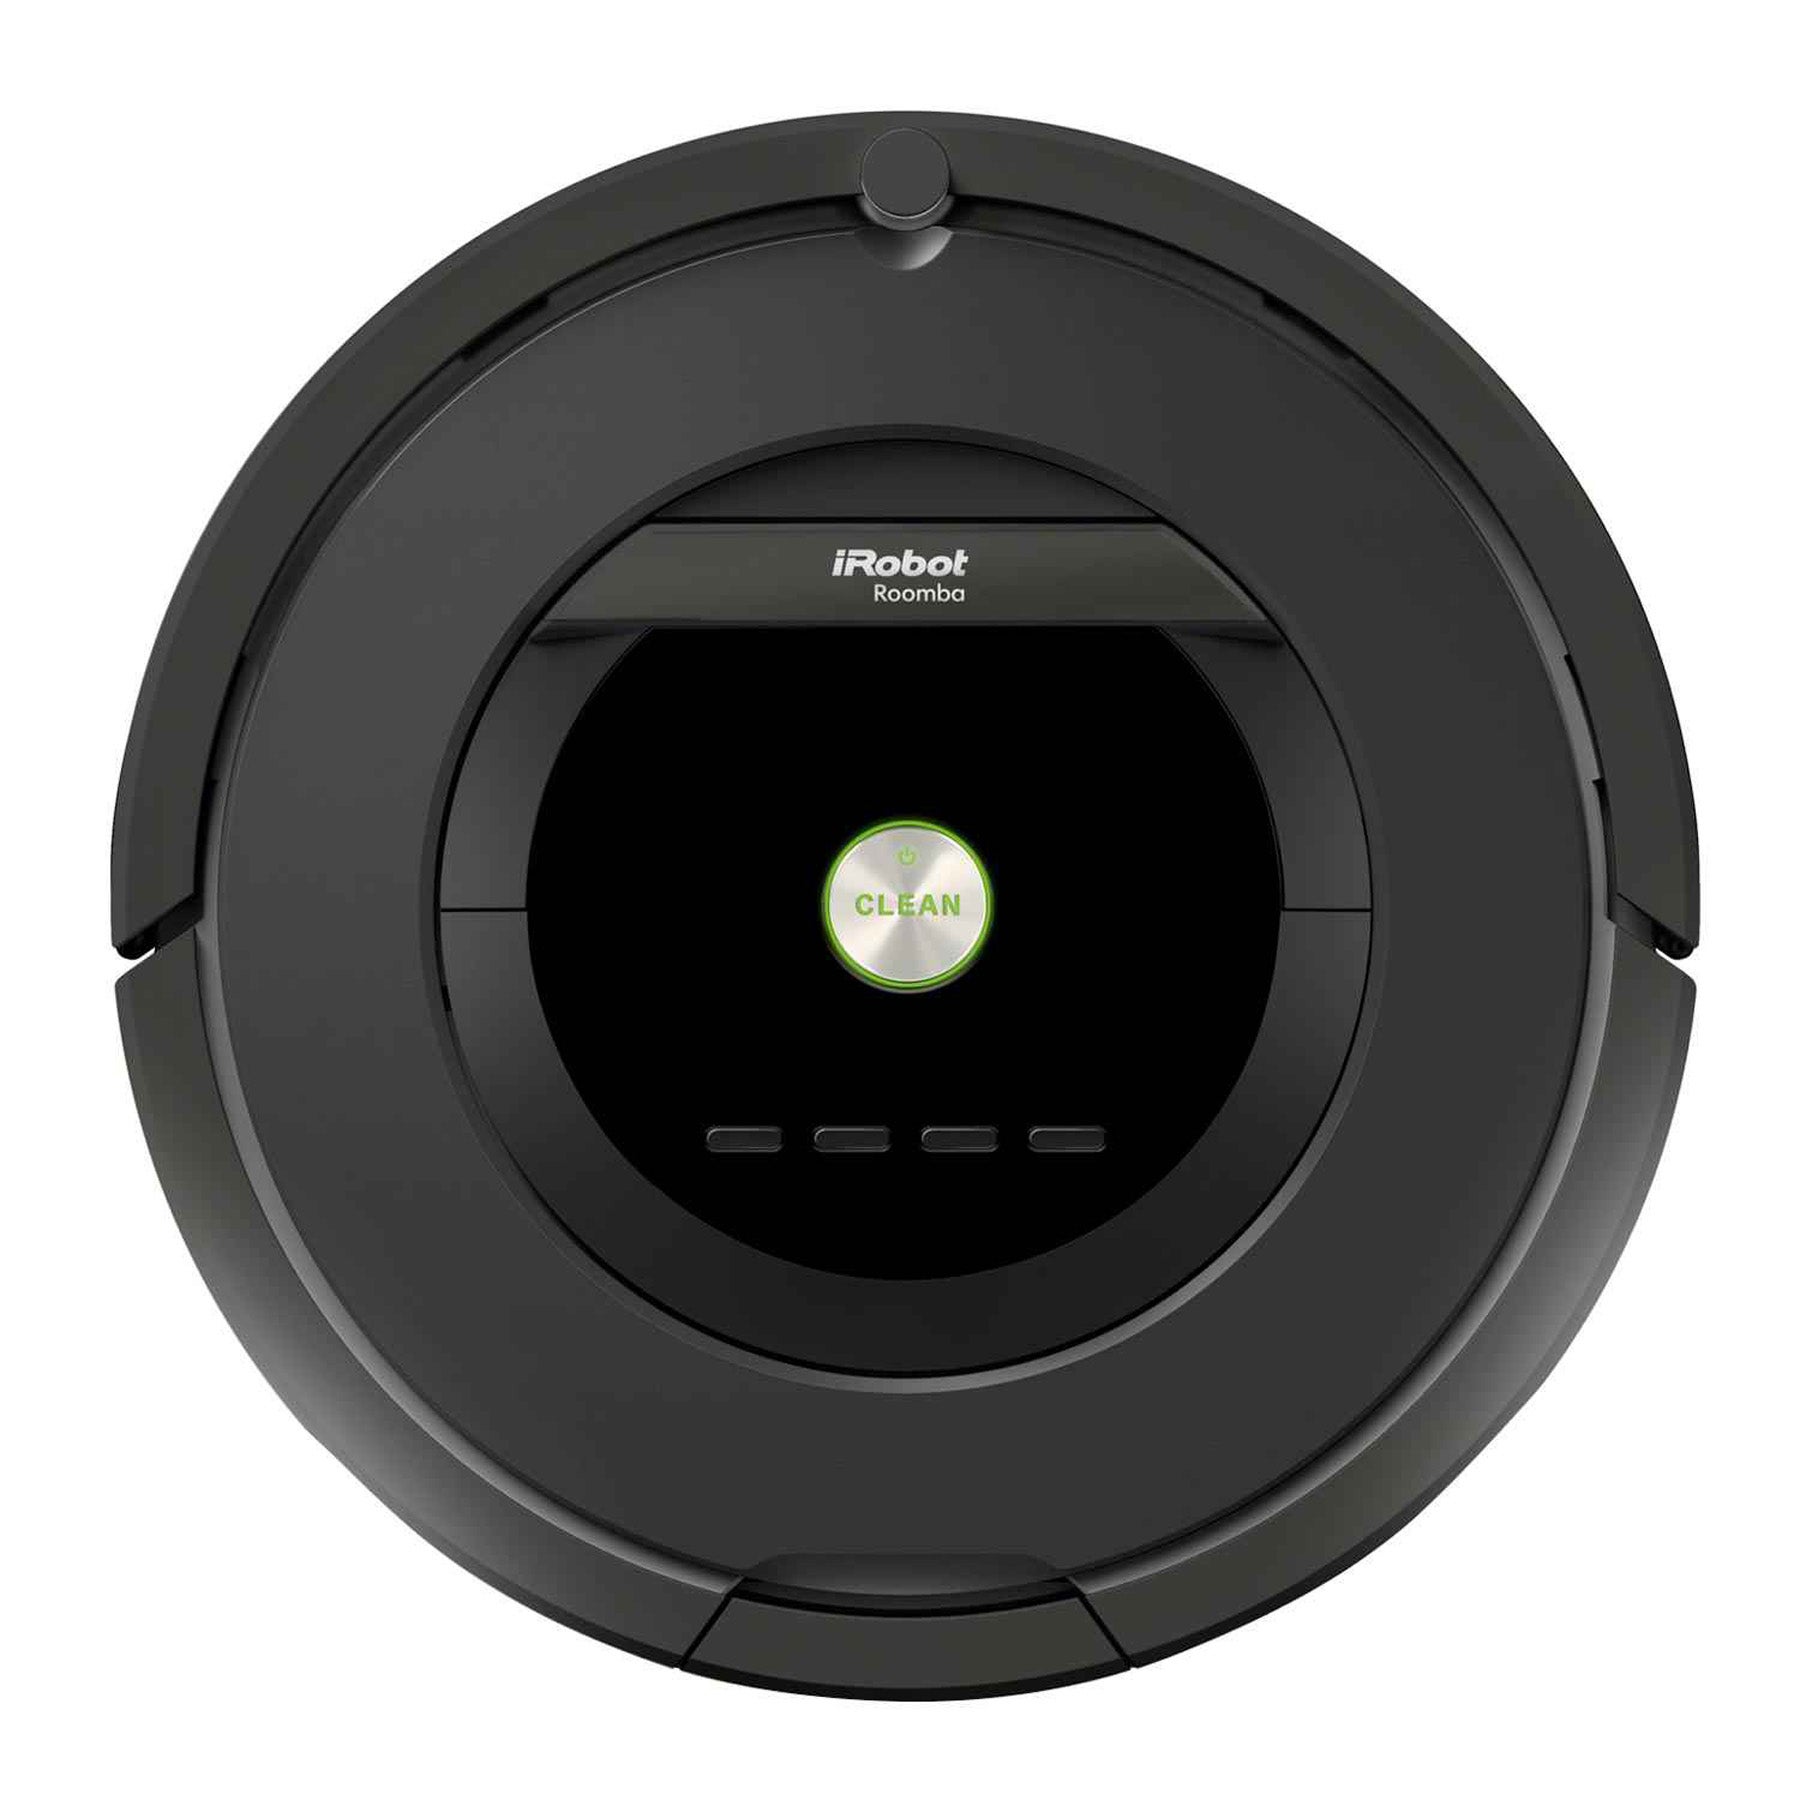 iRobot Roomba 875 vacuum cleaner with green clean button.